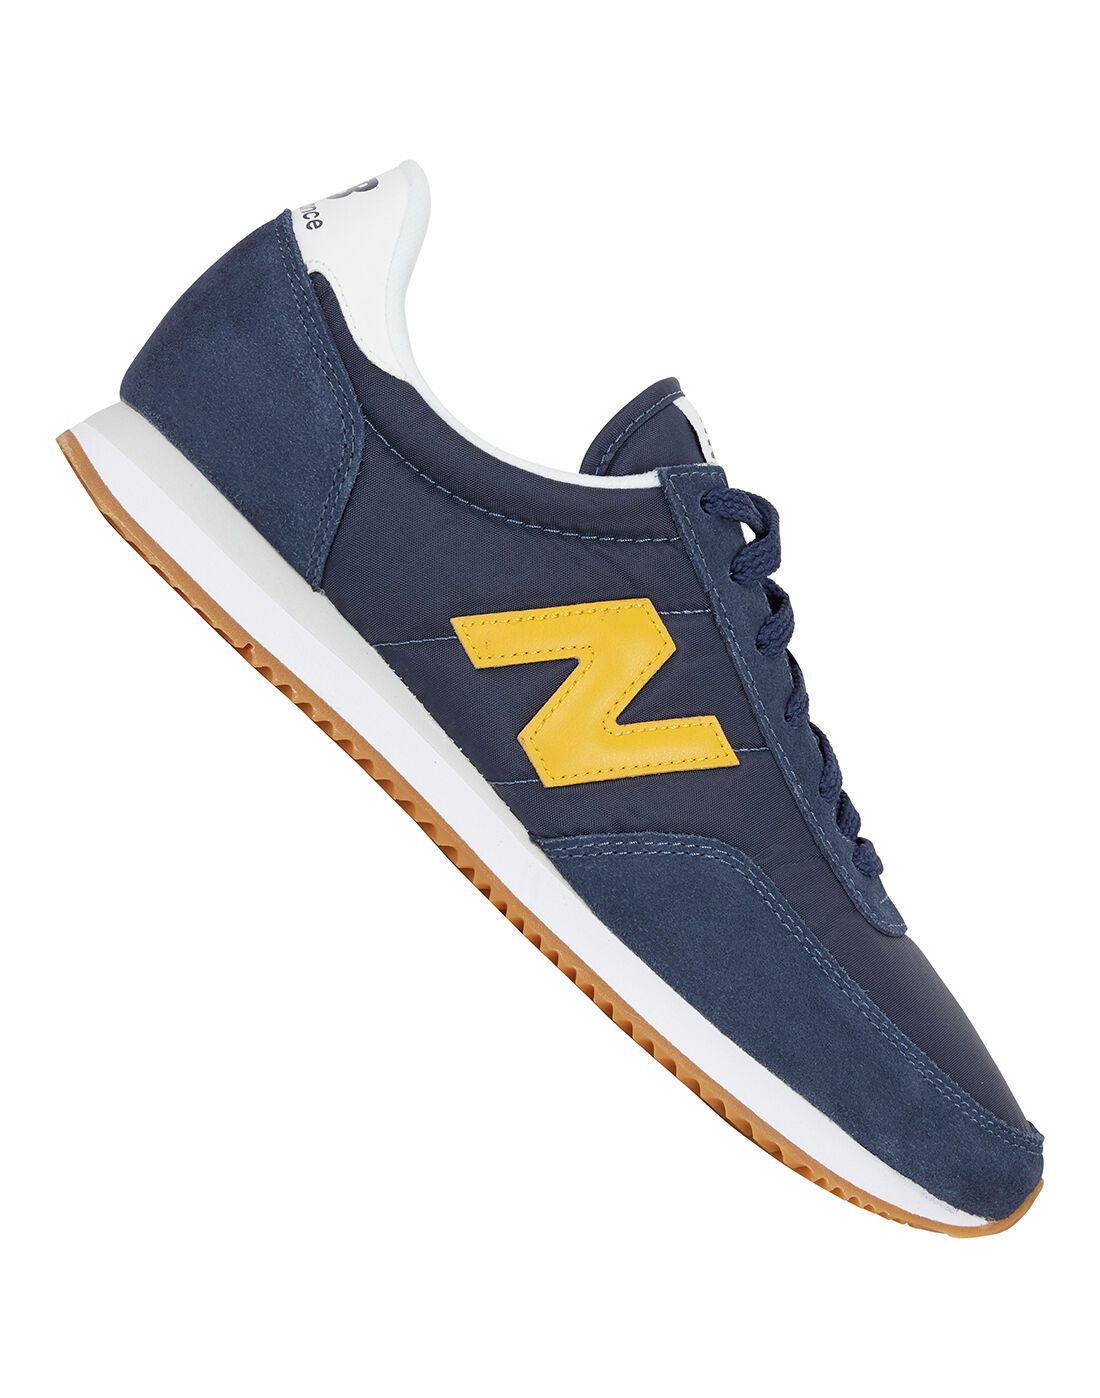 New Balance Mens 720 Trainers - Navy 